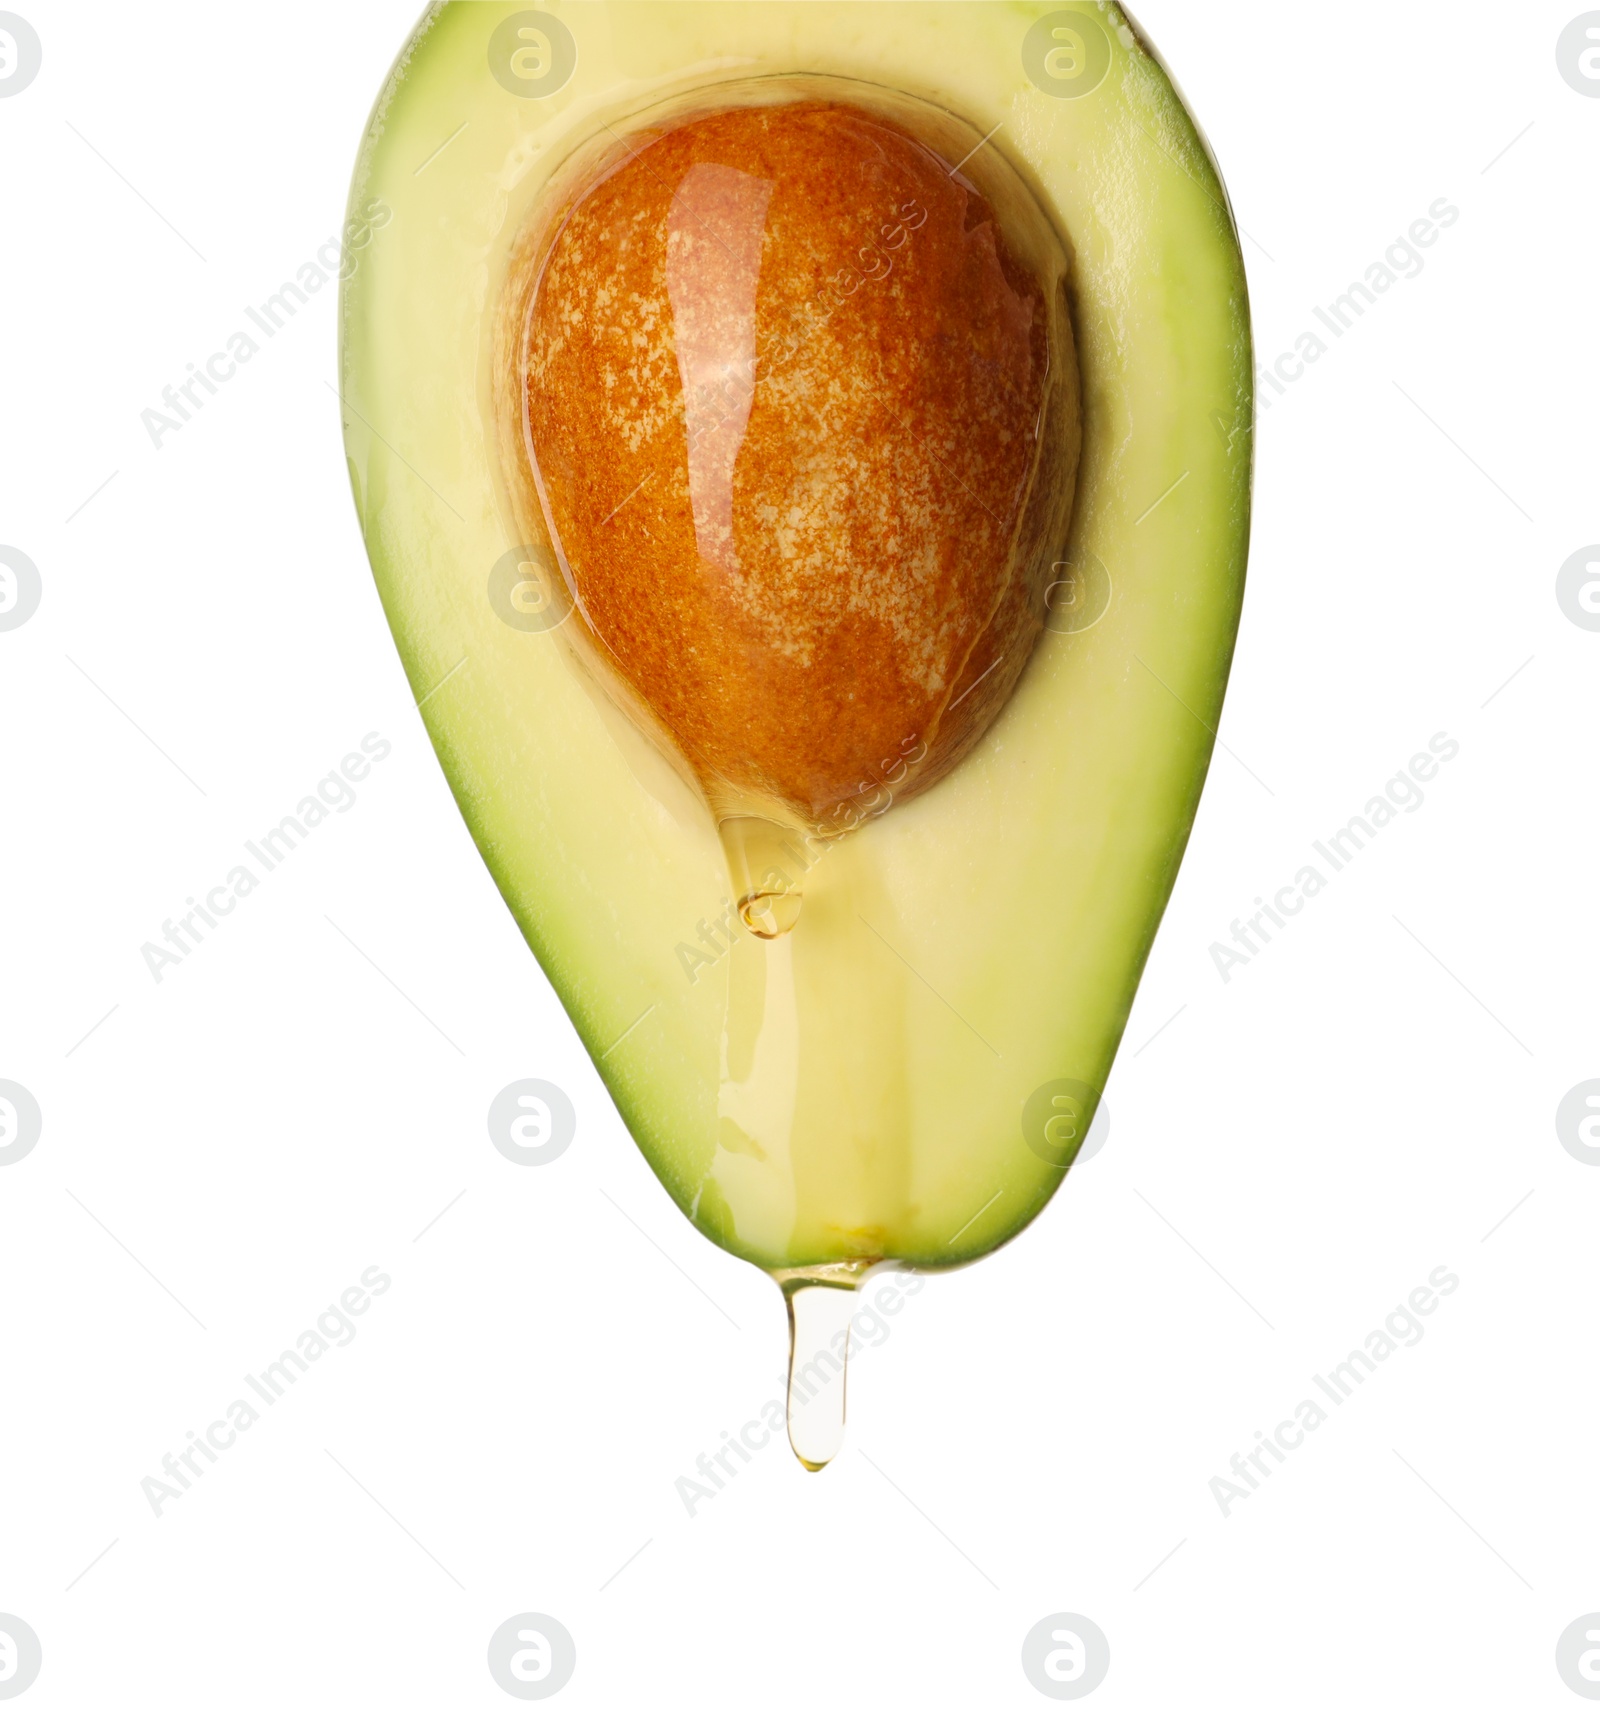 Photo of Fresh cut avocado with dripping cooking oil on white background